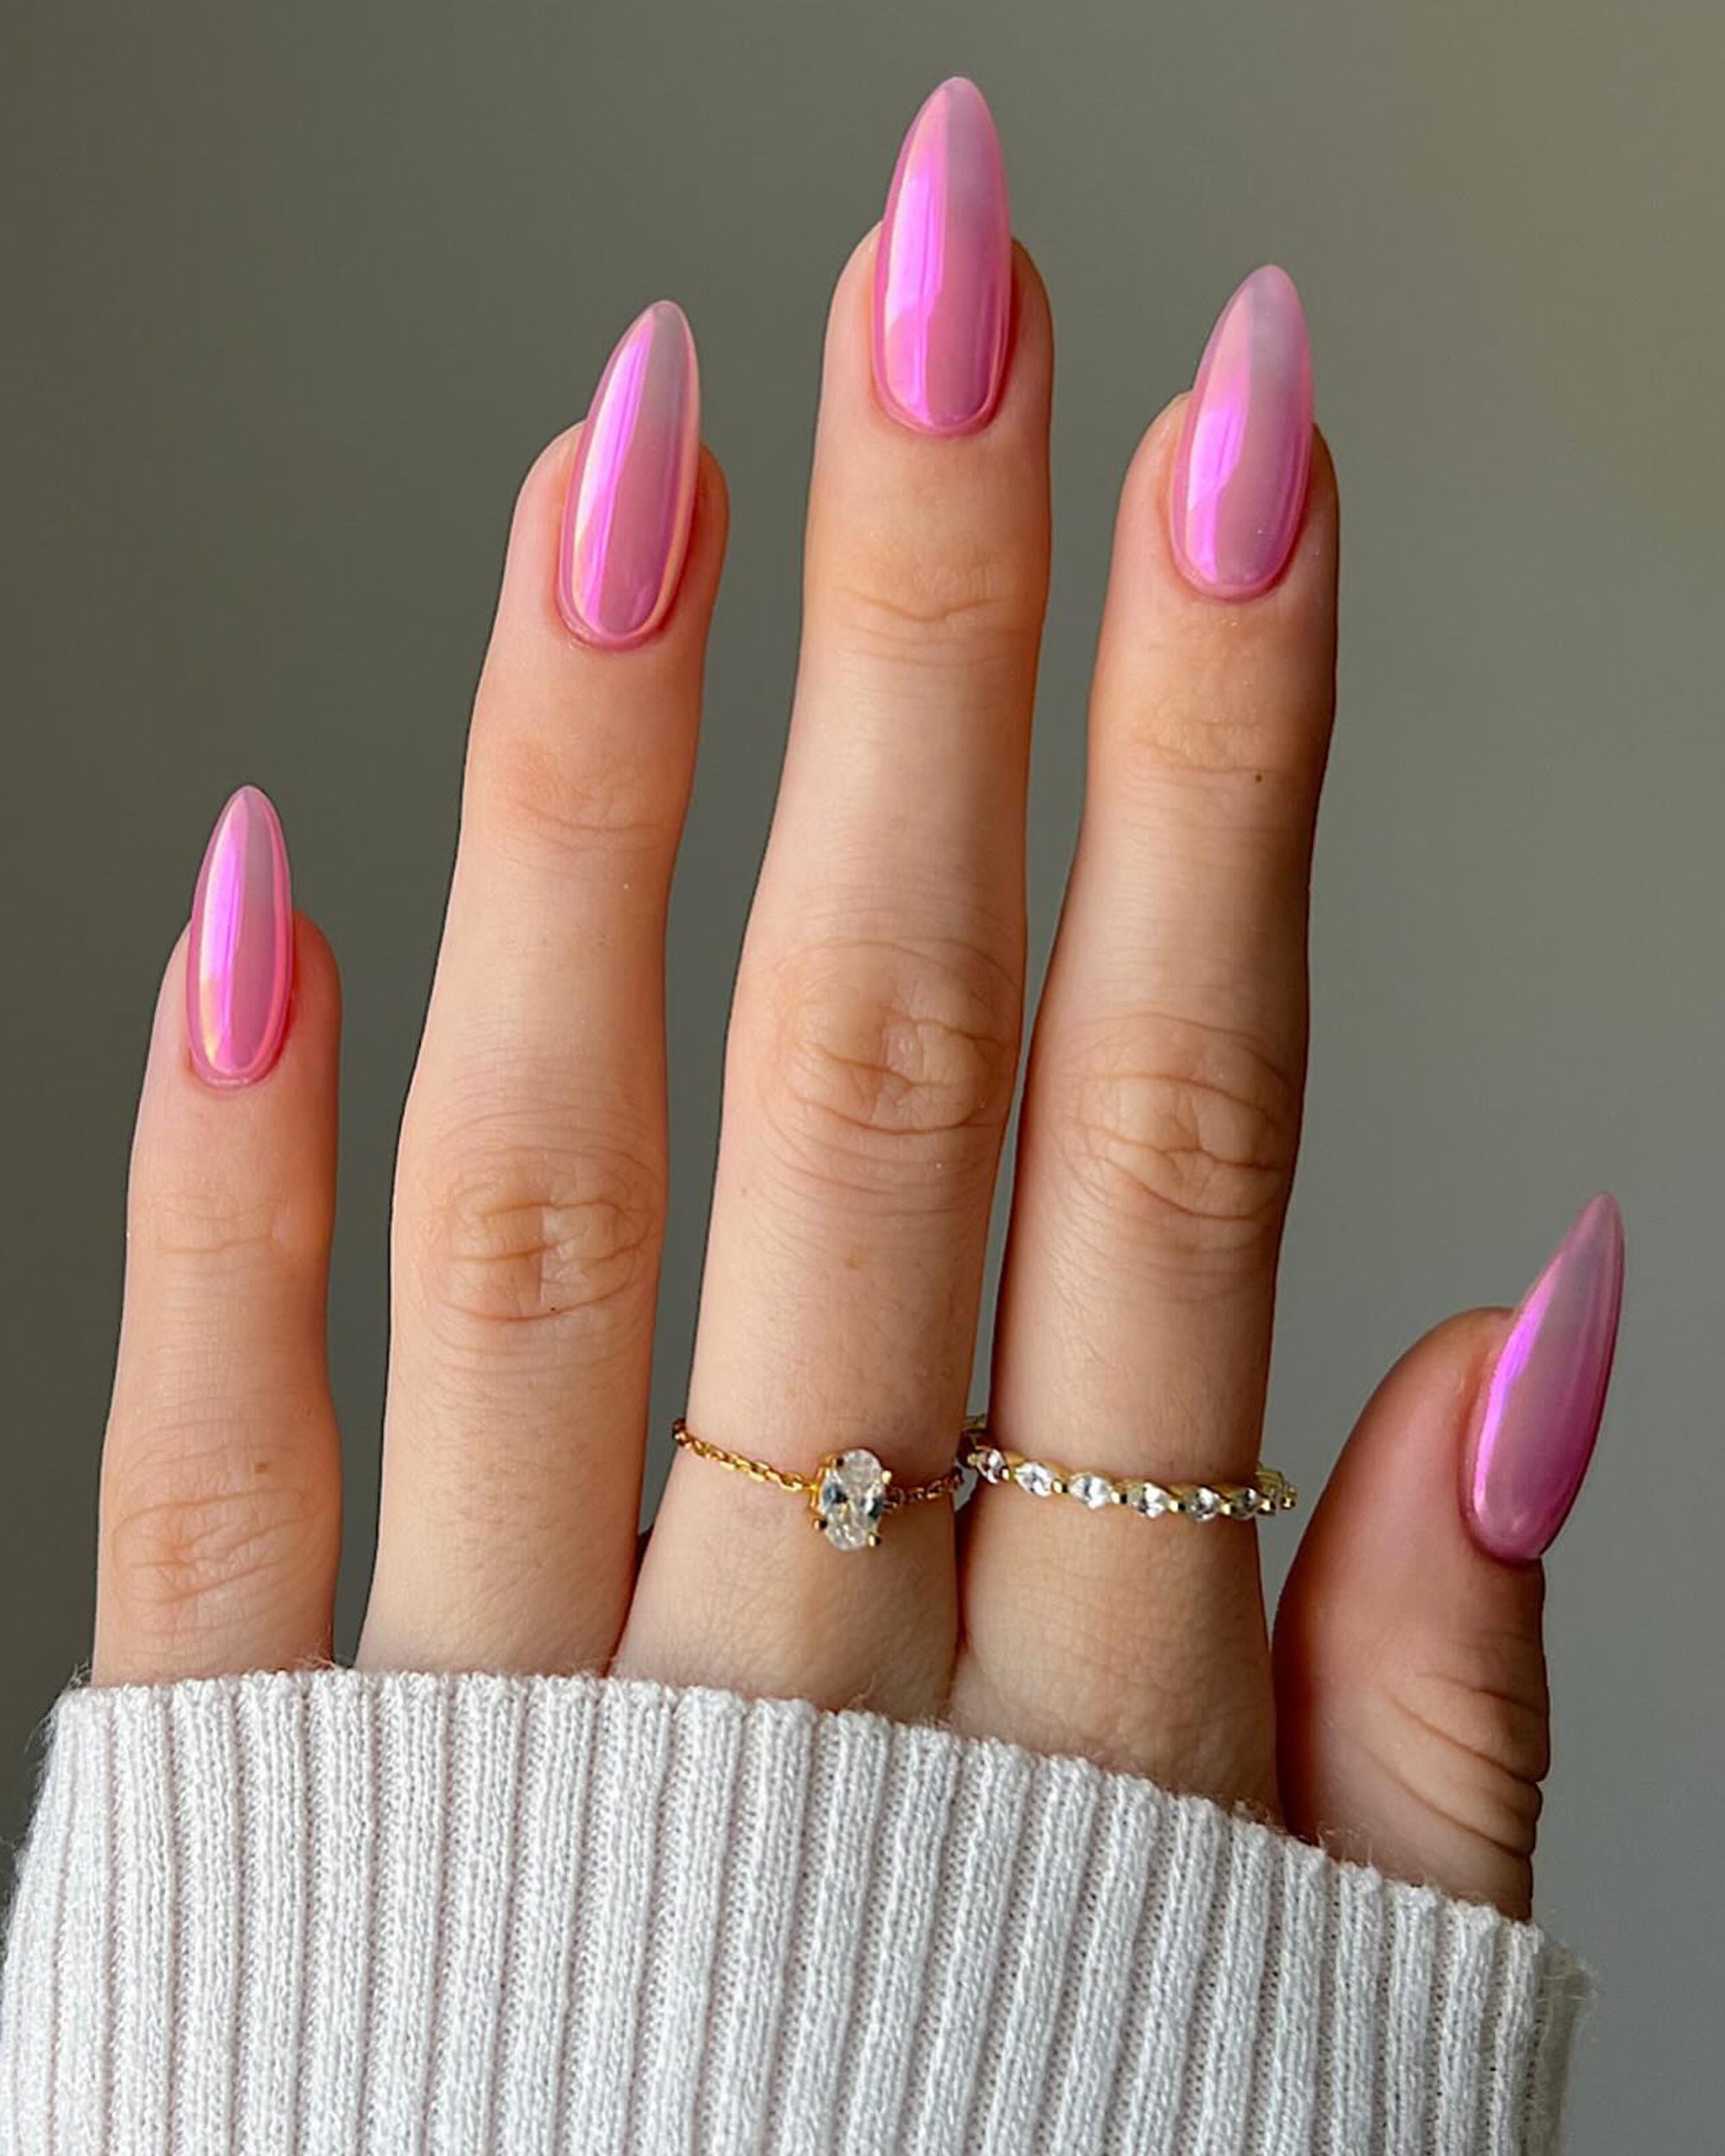 Is Manicure Good For Your Nails? Benefits, Uses And Steps To Follow For A  Perfect Nail Care